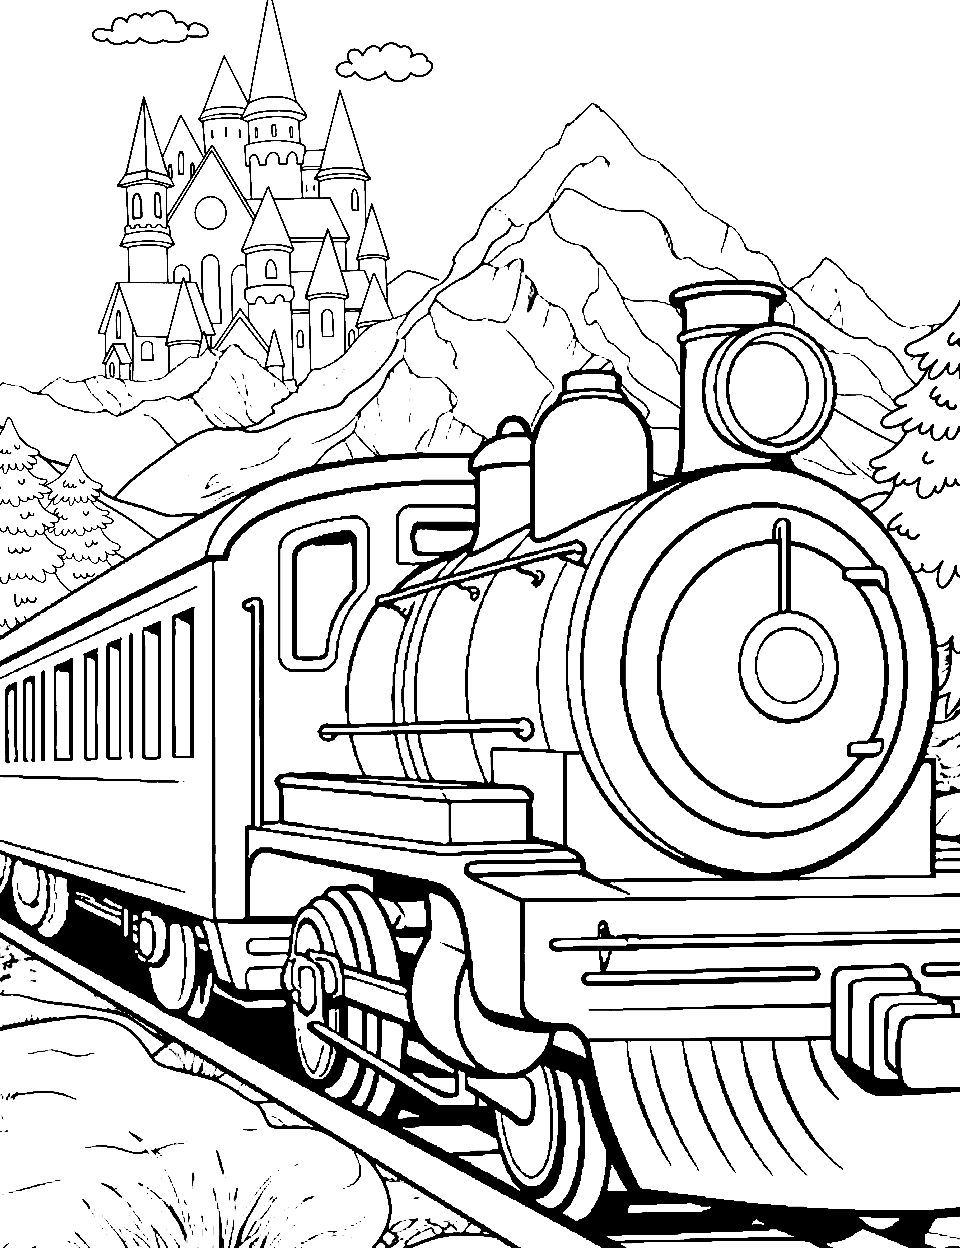 Fairytale Train Adventure Coloring Page - A train traveling through classic fairytale scenes.